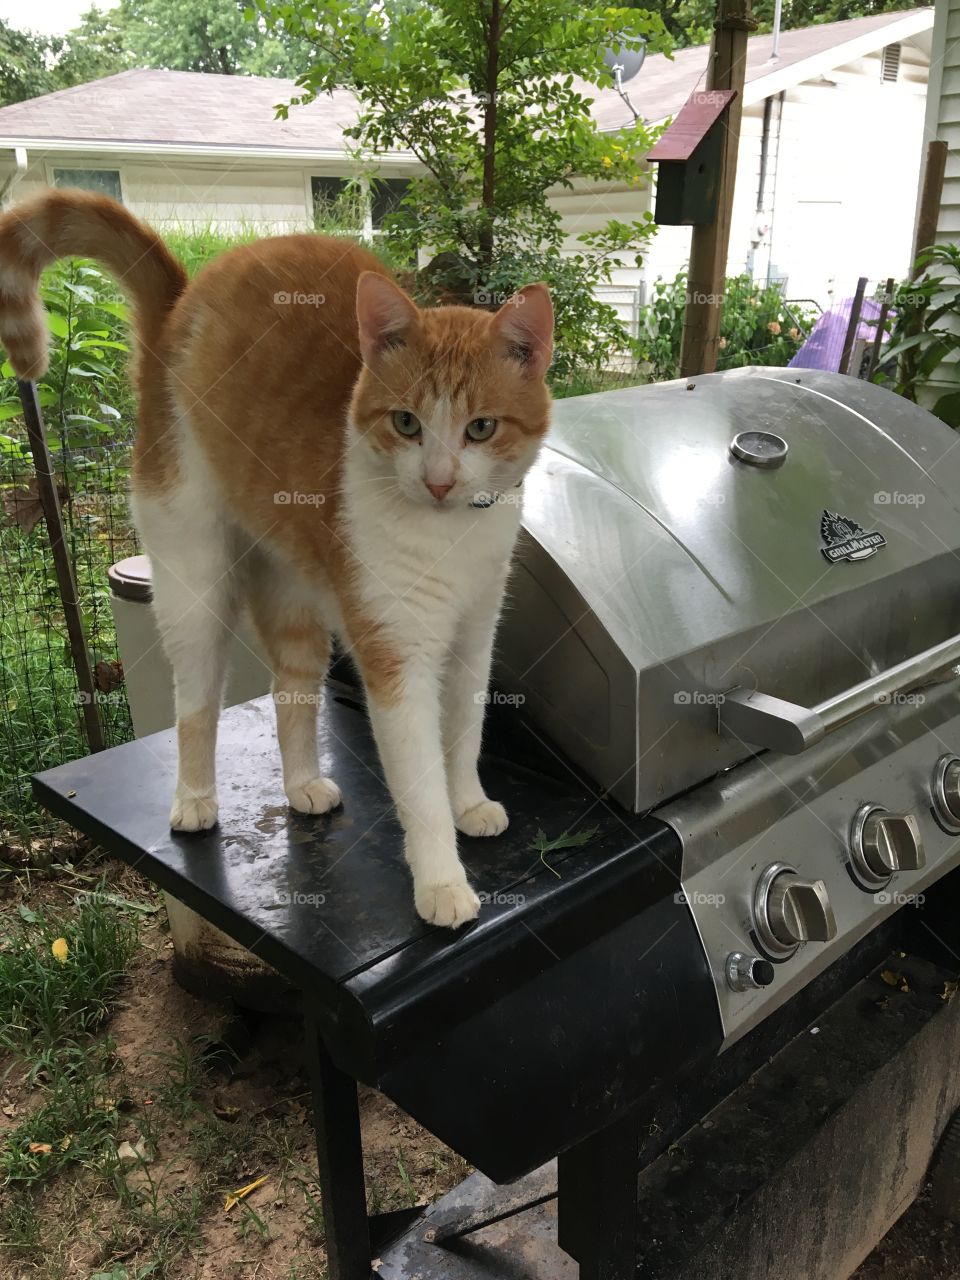 Hey are you the one cooking? I want chicken or maybe ribs. Fire up the grill o.k